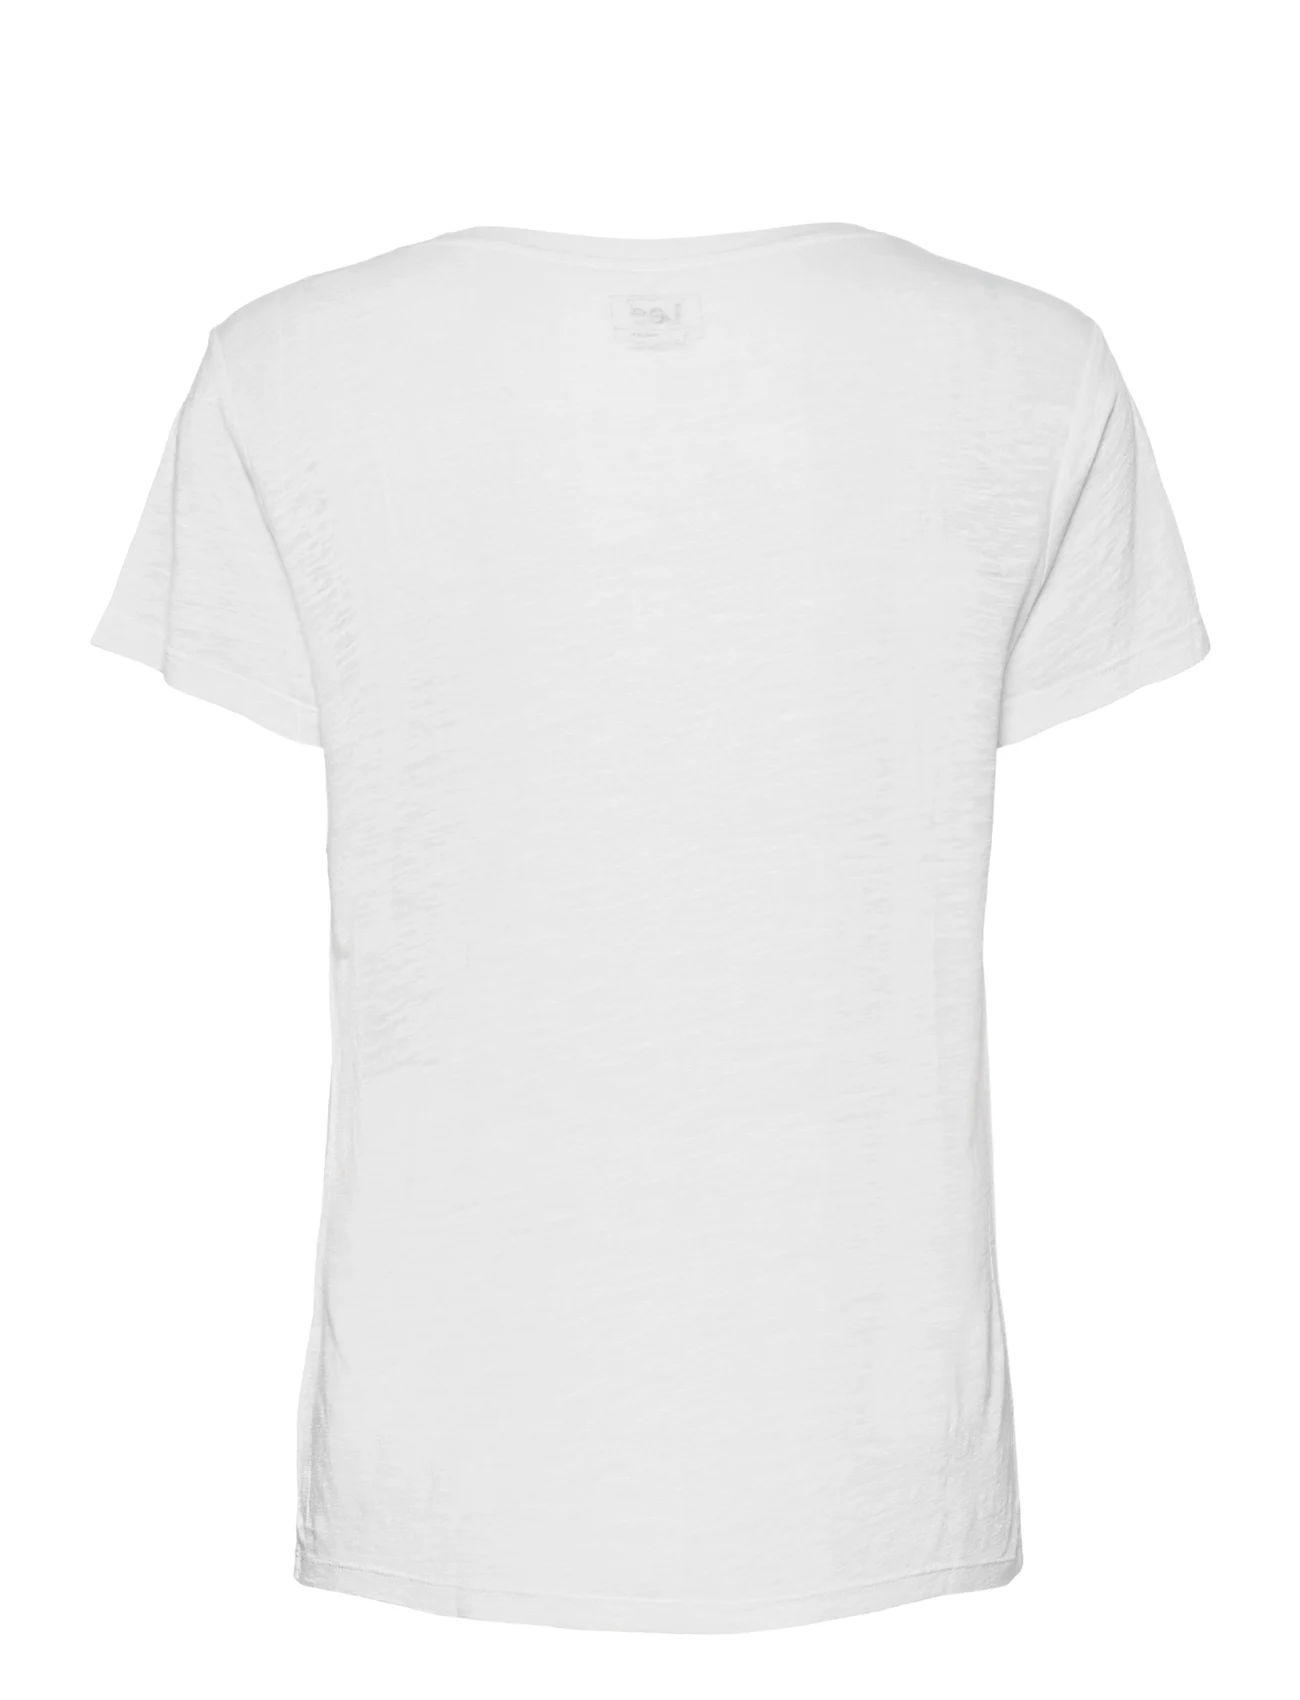 Lee Jeans - V NECK TEE - t-shirts - bright white - 1